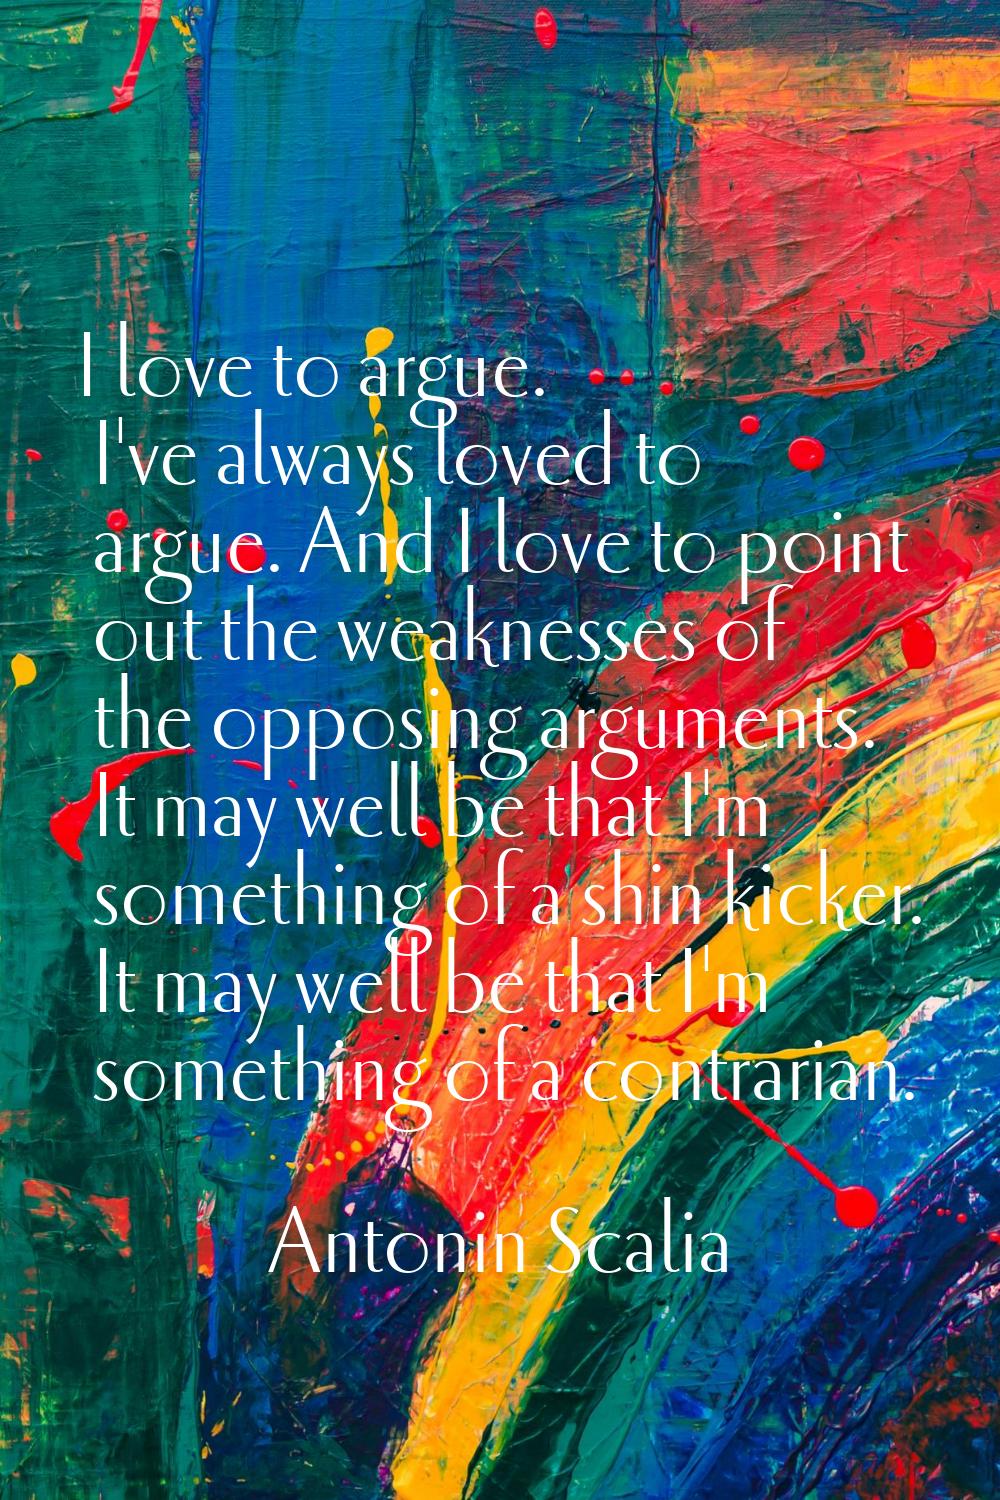 I love to argue. I've always loved to argue. And I love to point out the weaknesses of the opposing